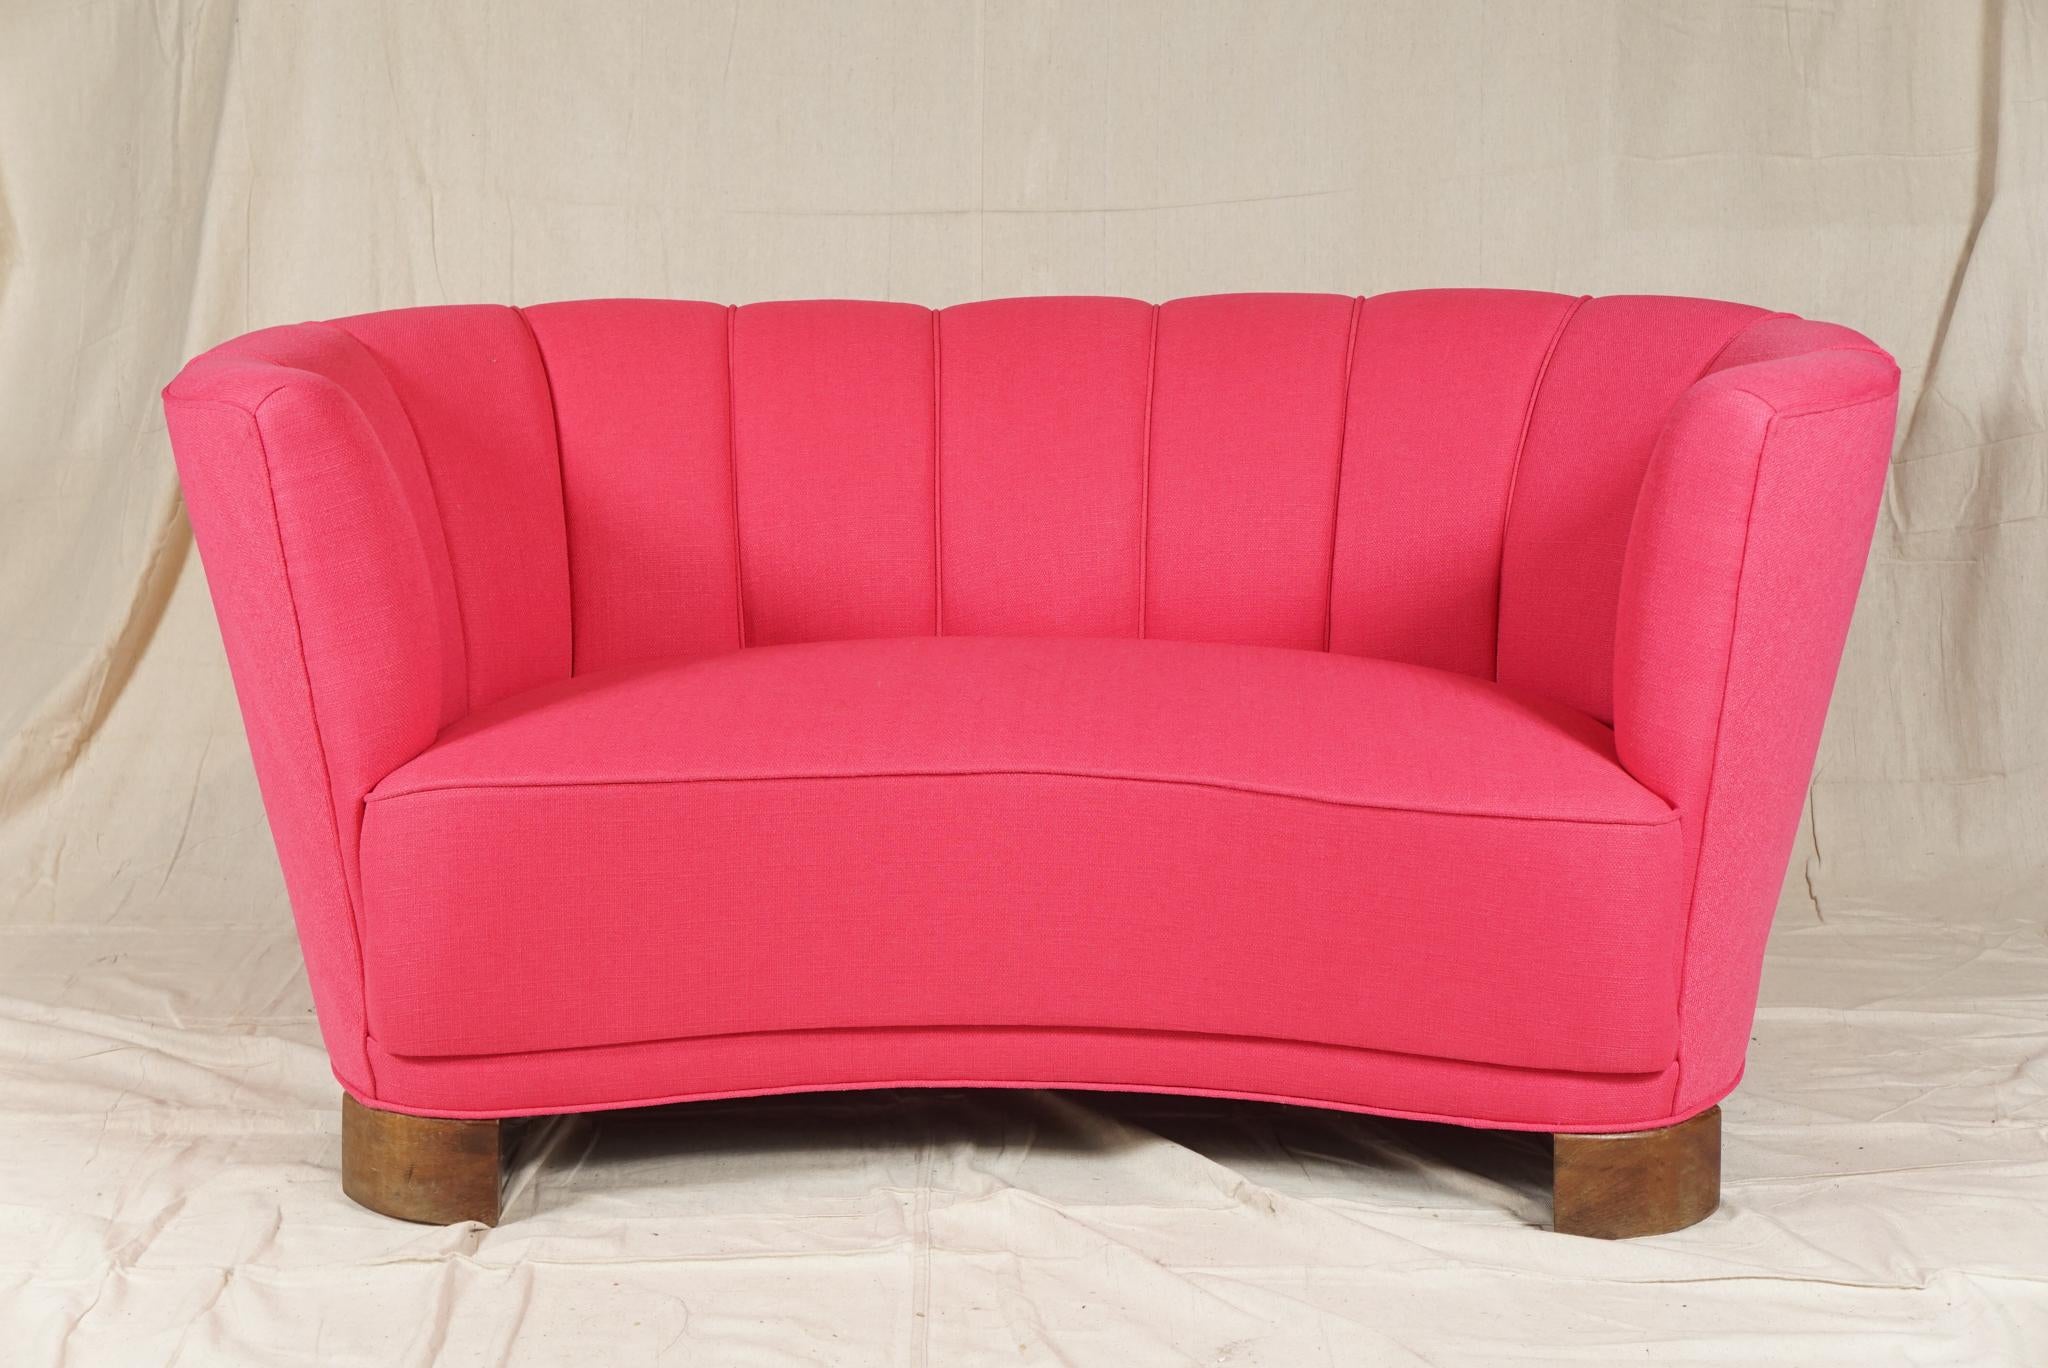 Pretty in pink. Danish modern curved sofa known as a 'banana' sofa, with channeled back and beechwood legs, from the 1950s, newly recovered. Slagelse Møbelvaerk Furniture.